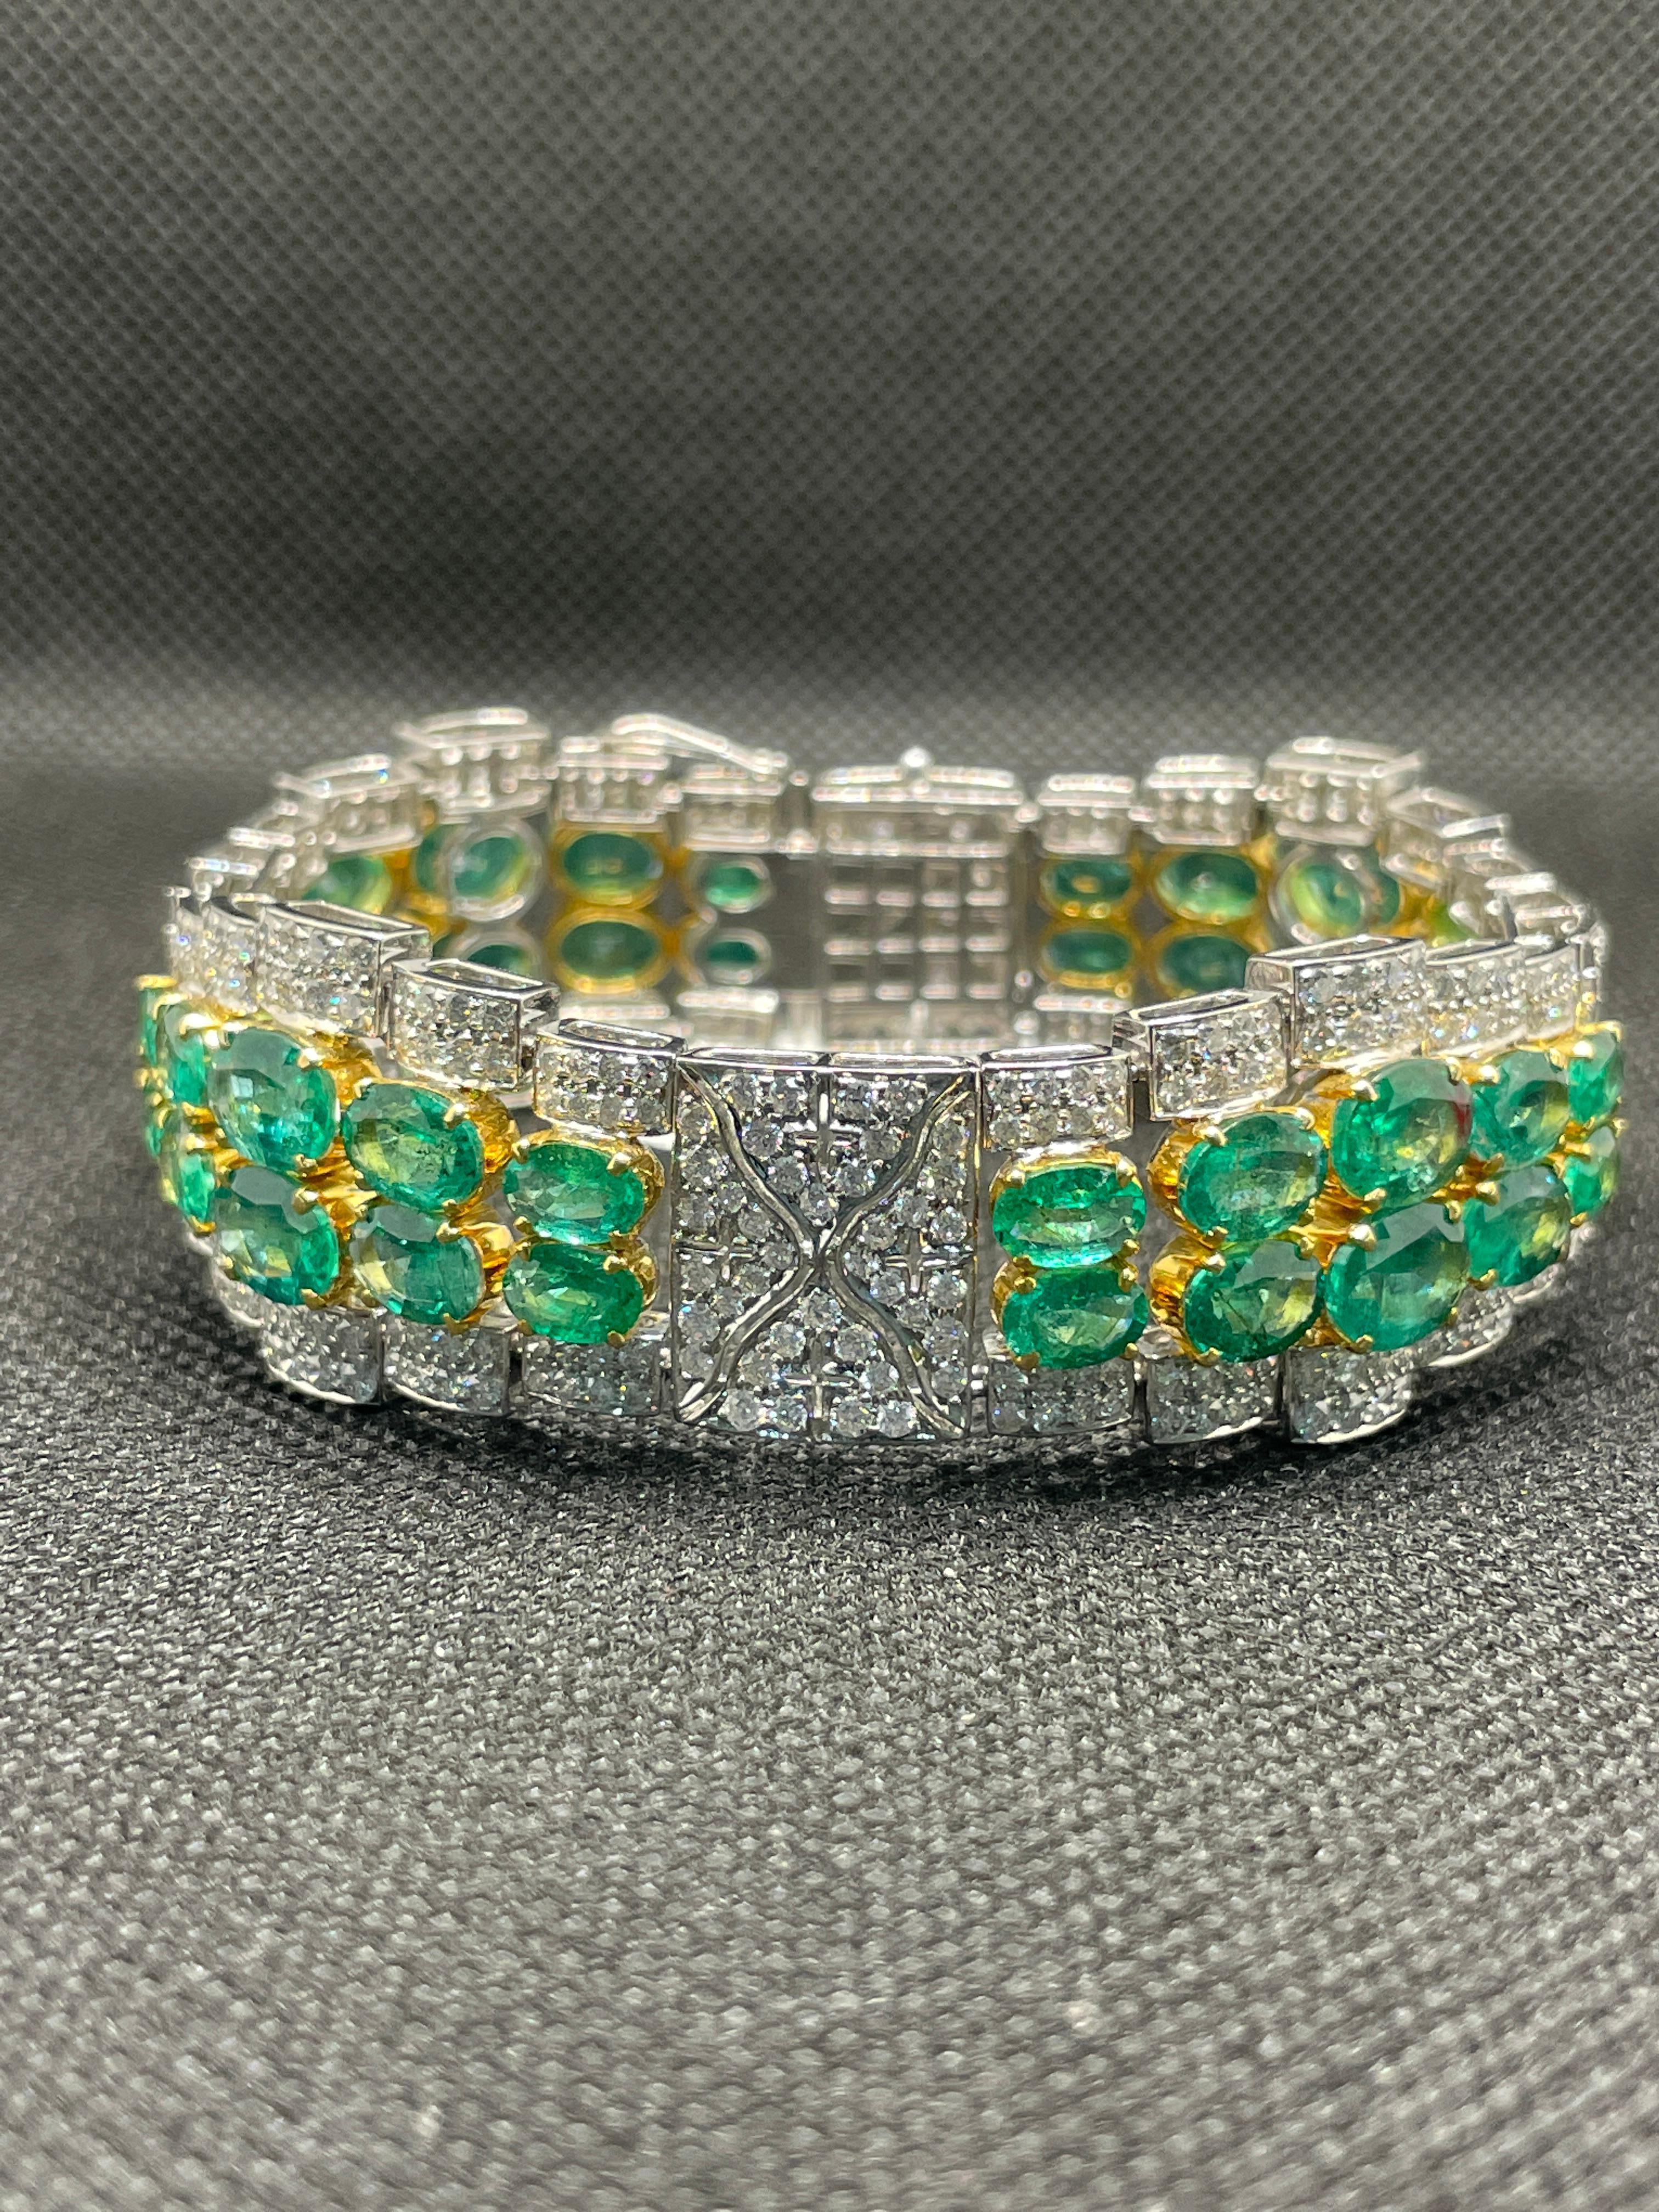 This Art Deco Emerald Diamond Wedding Bracelet in 18K gold showcases 40 endlessly sparkling natural emerald, weighing 23.74 carat and diamonds weighing 7.09 carat. It measures 7.5 inches long in length. 
Emerald enhances the intellectual capacity of